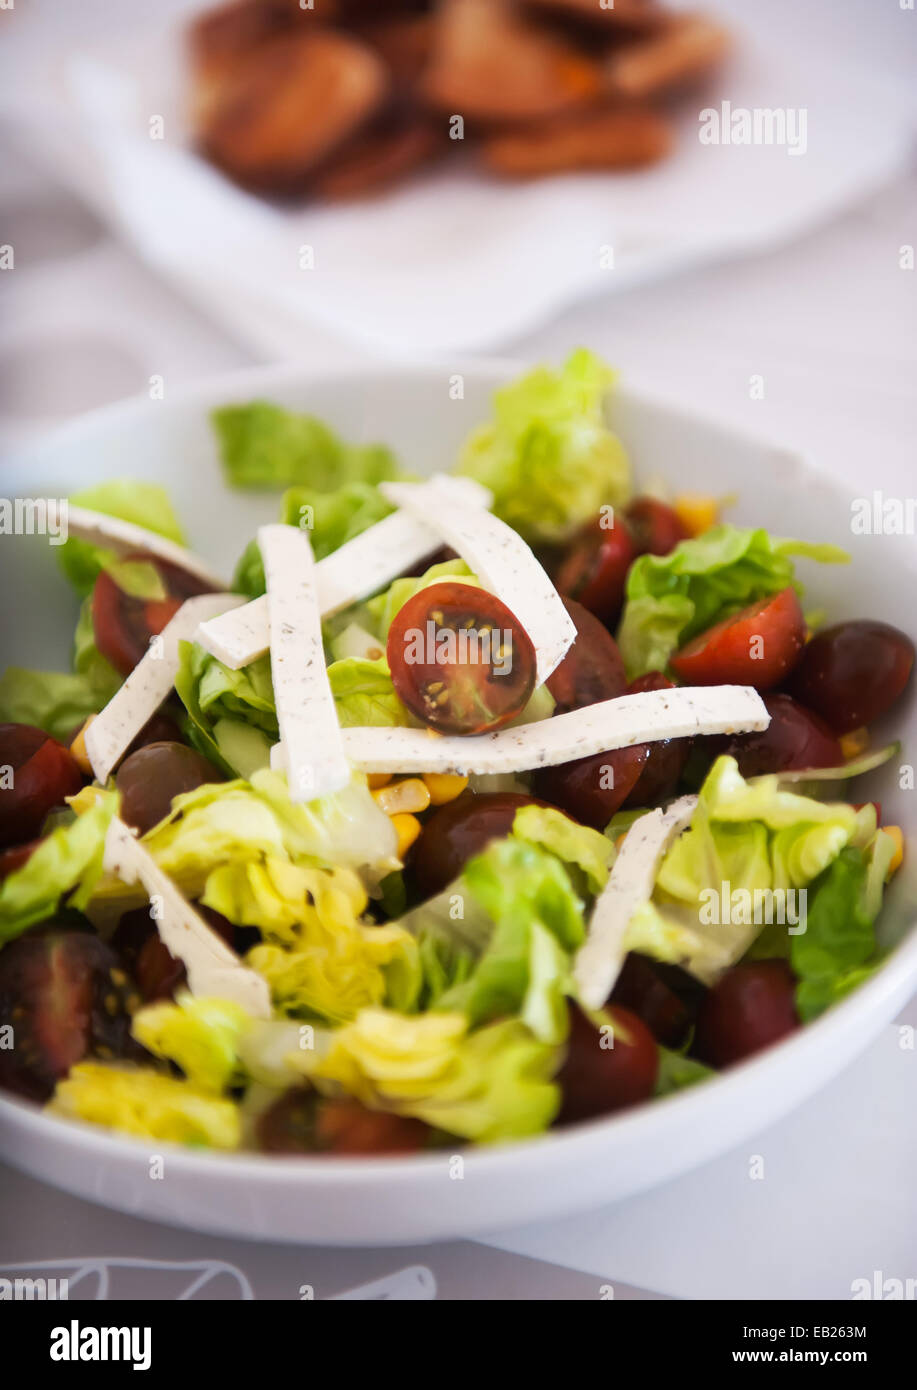 Salad with lettuce, cherry tomatoes and cheese with diced Stock Photo